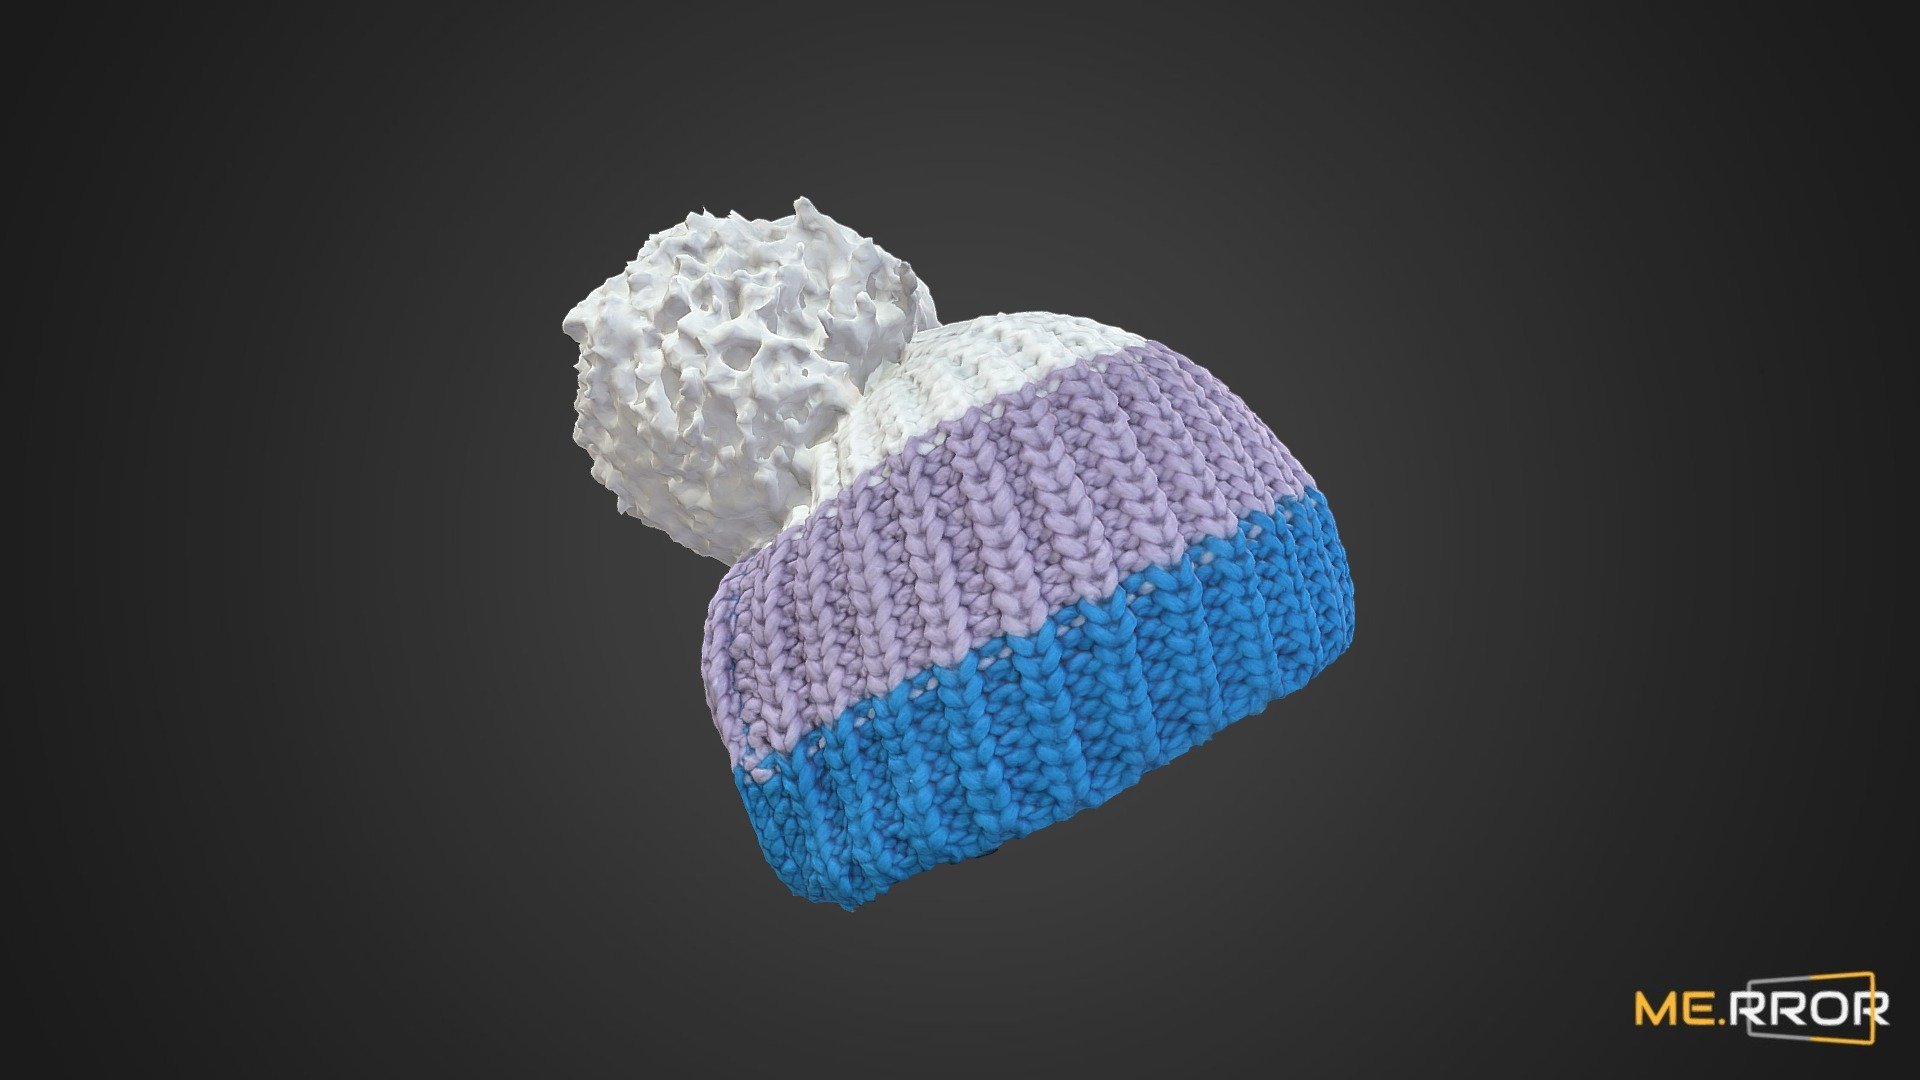 MERROR is a 3D Content PLATFORM which introduces various Asian assets to the 3D world


3DScanning #Photogrametry #ME.RROR - 3 Color Knit Hat - Buy Royalty Free 3D model by ME.RROR Studio (@merror) 3d model